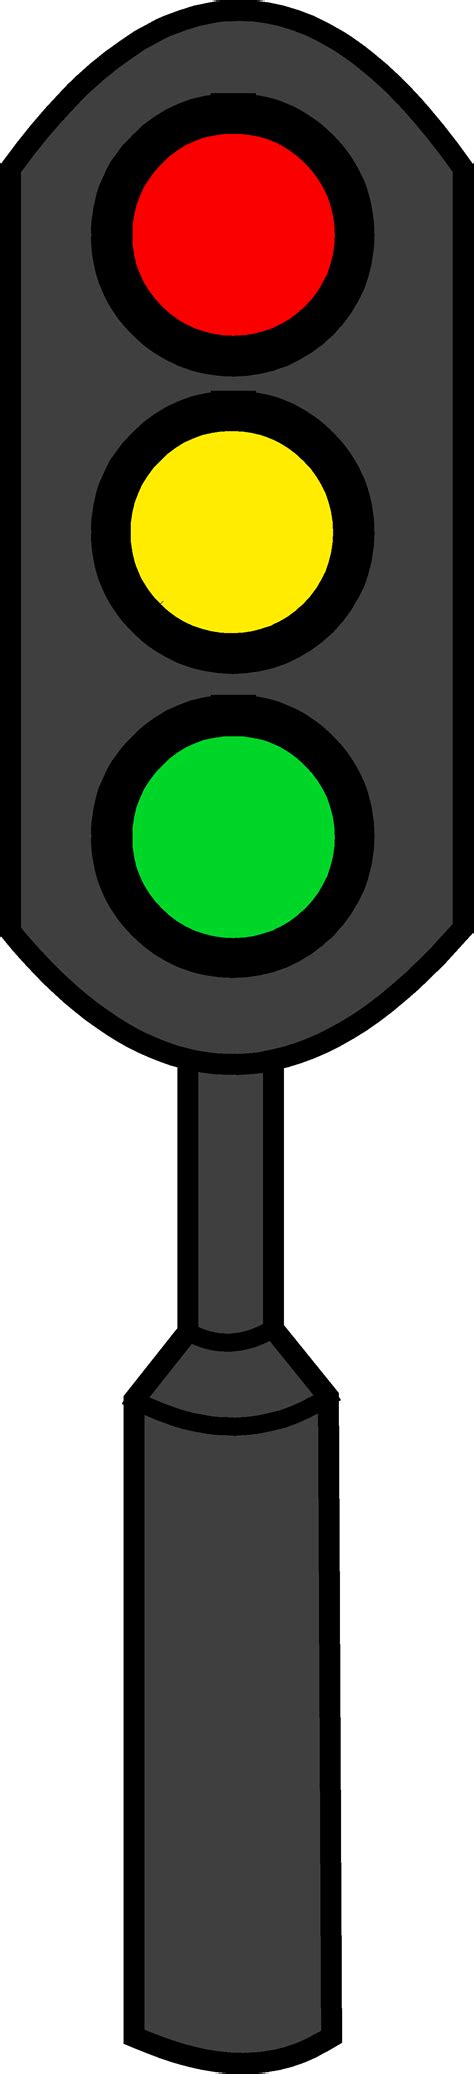 Traffic Light Picture Clipart Best